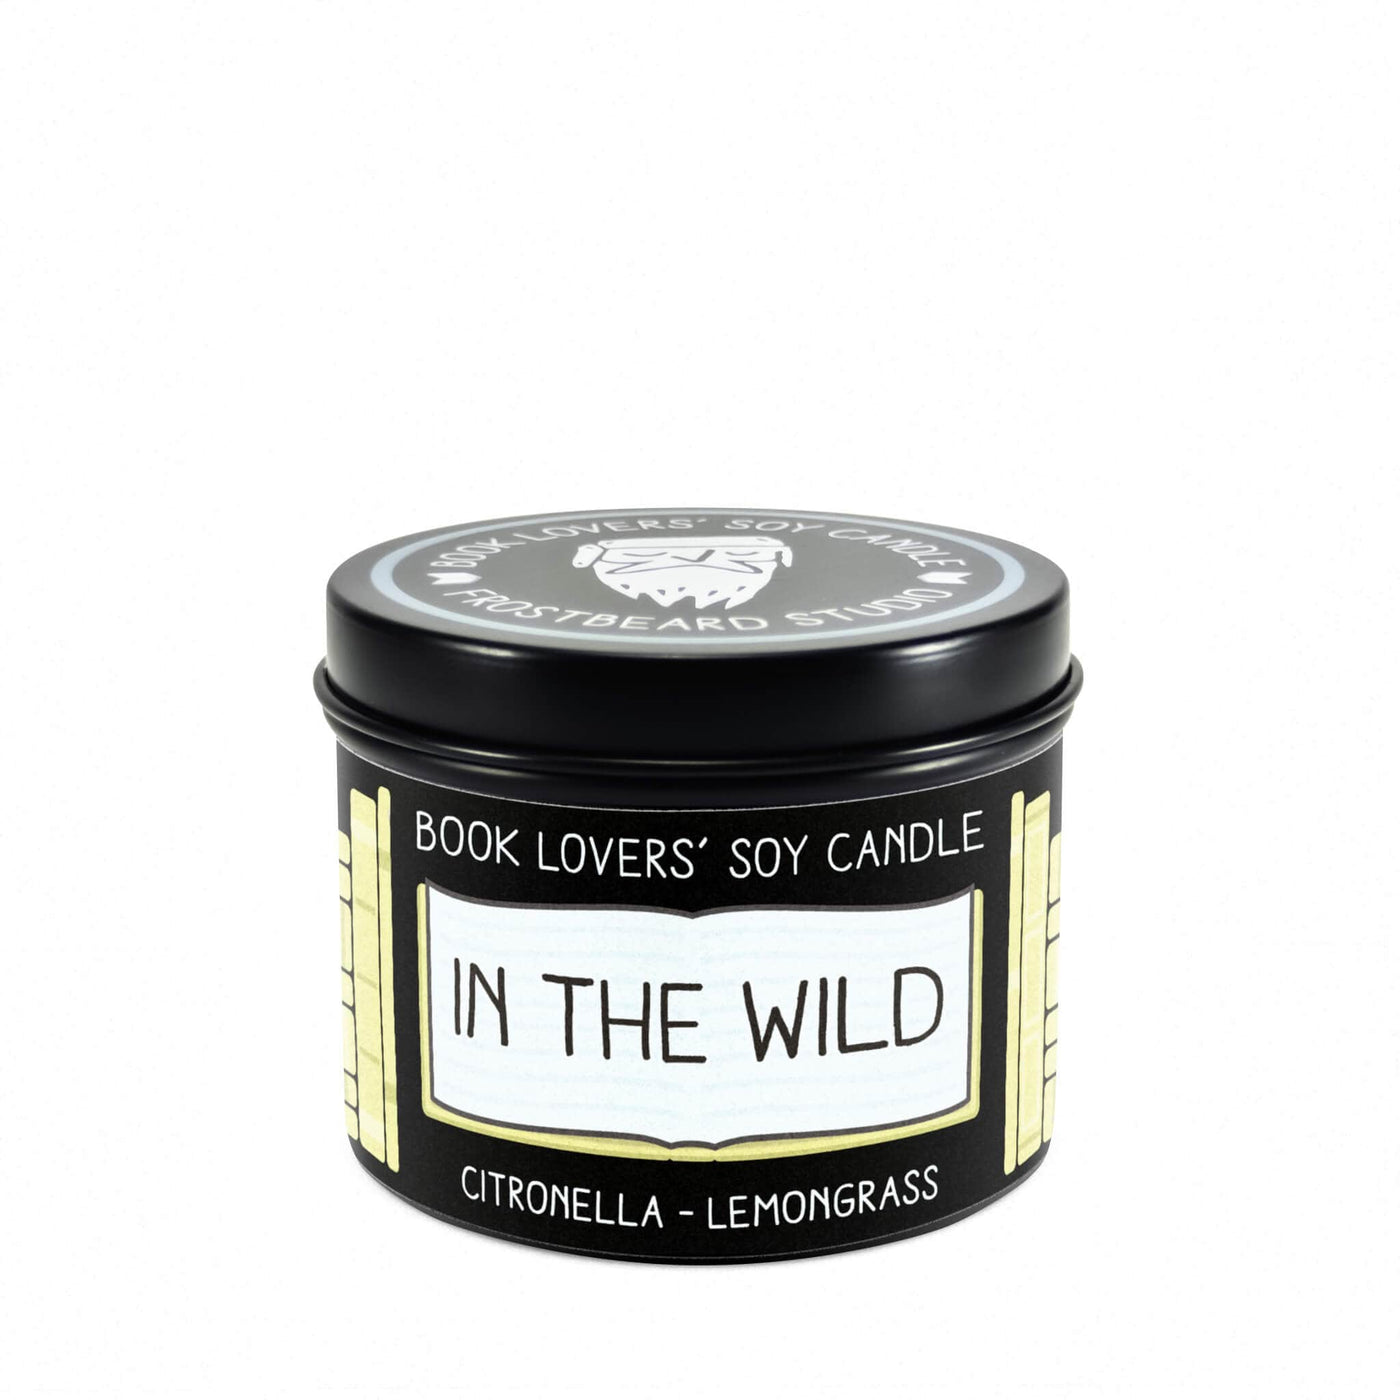 In the Wild - 4 oz Tin - Book Lovers' Soy Candle - Frostbeard Studio